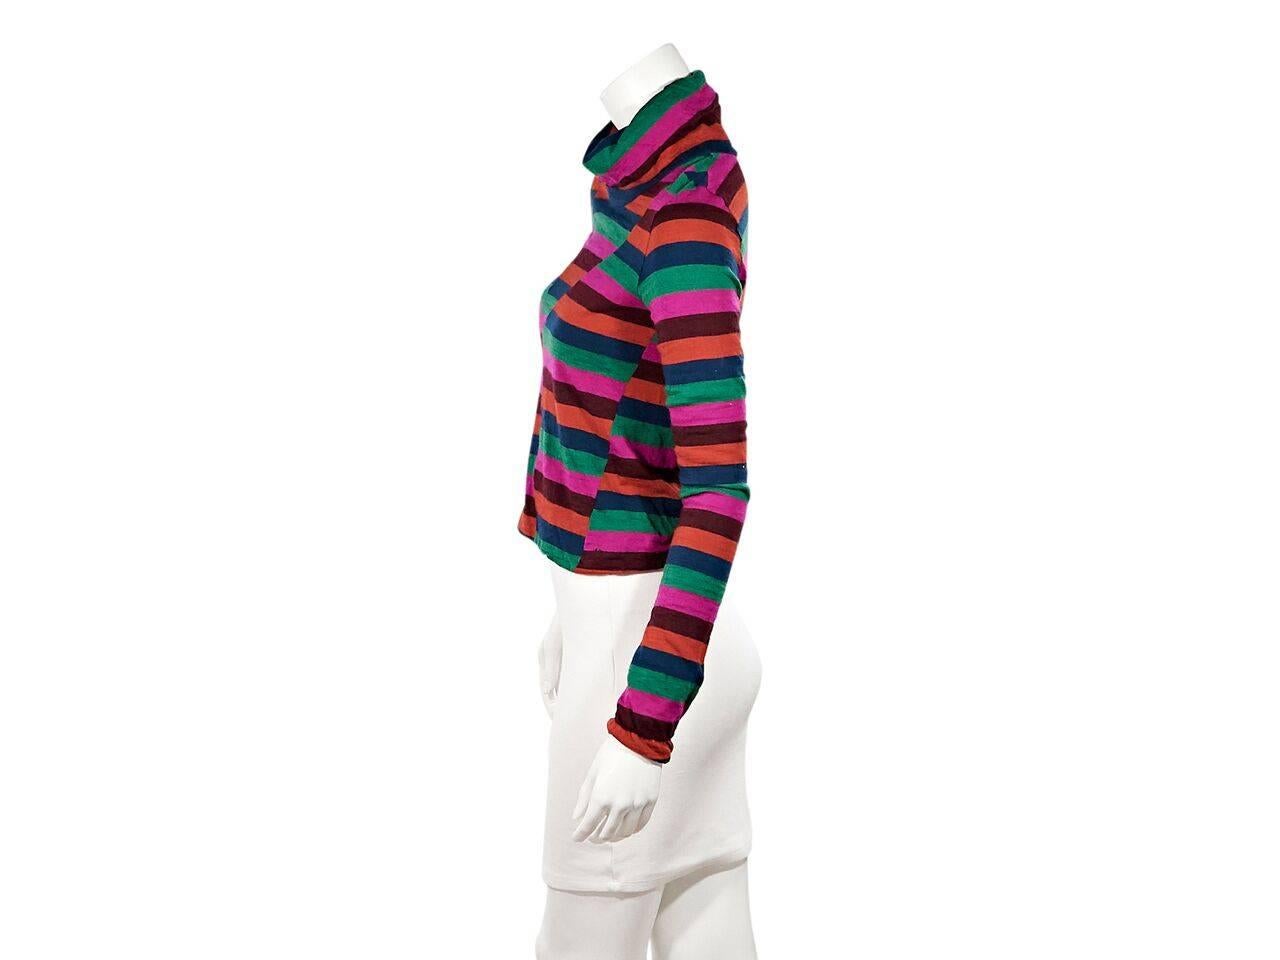 Product details:  Multicolor striped turtleneck sweater by Louis Vuitton.  Long sleeves.  Pullover style.  Label size FR 38.
Condition: Pre-owned. Very good.
Est. Retail $ 998.00